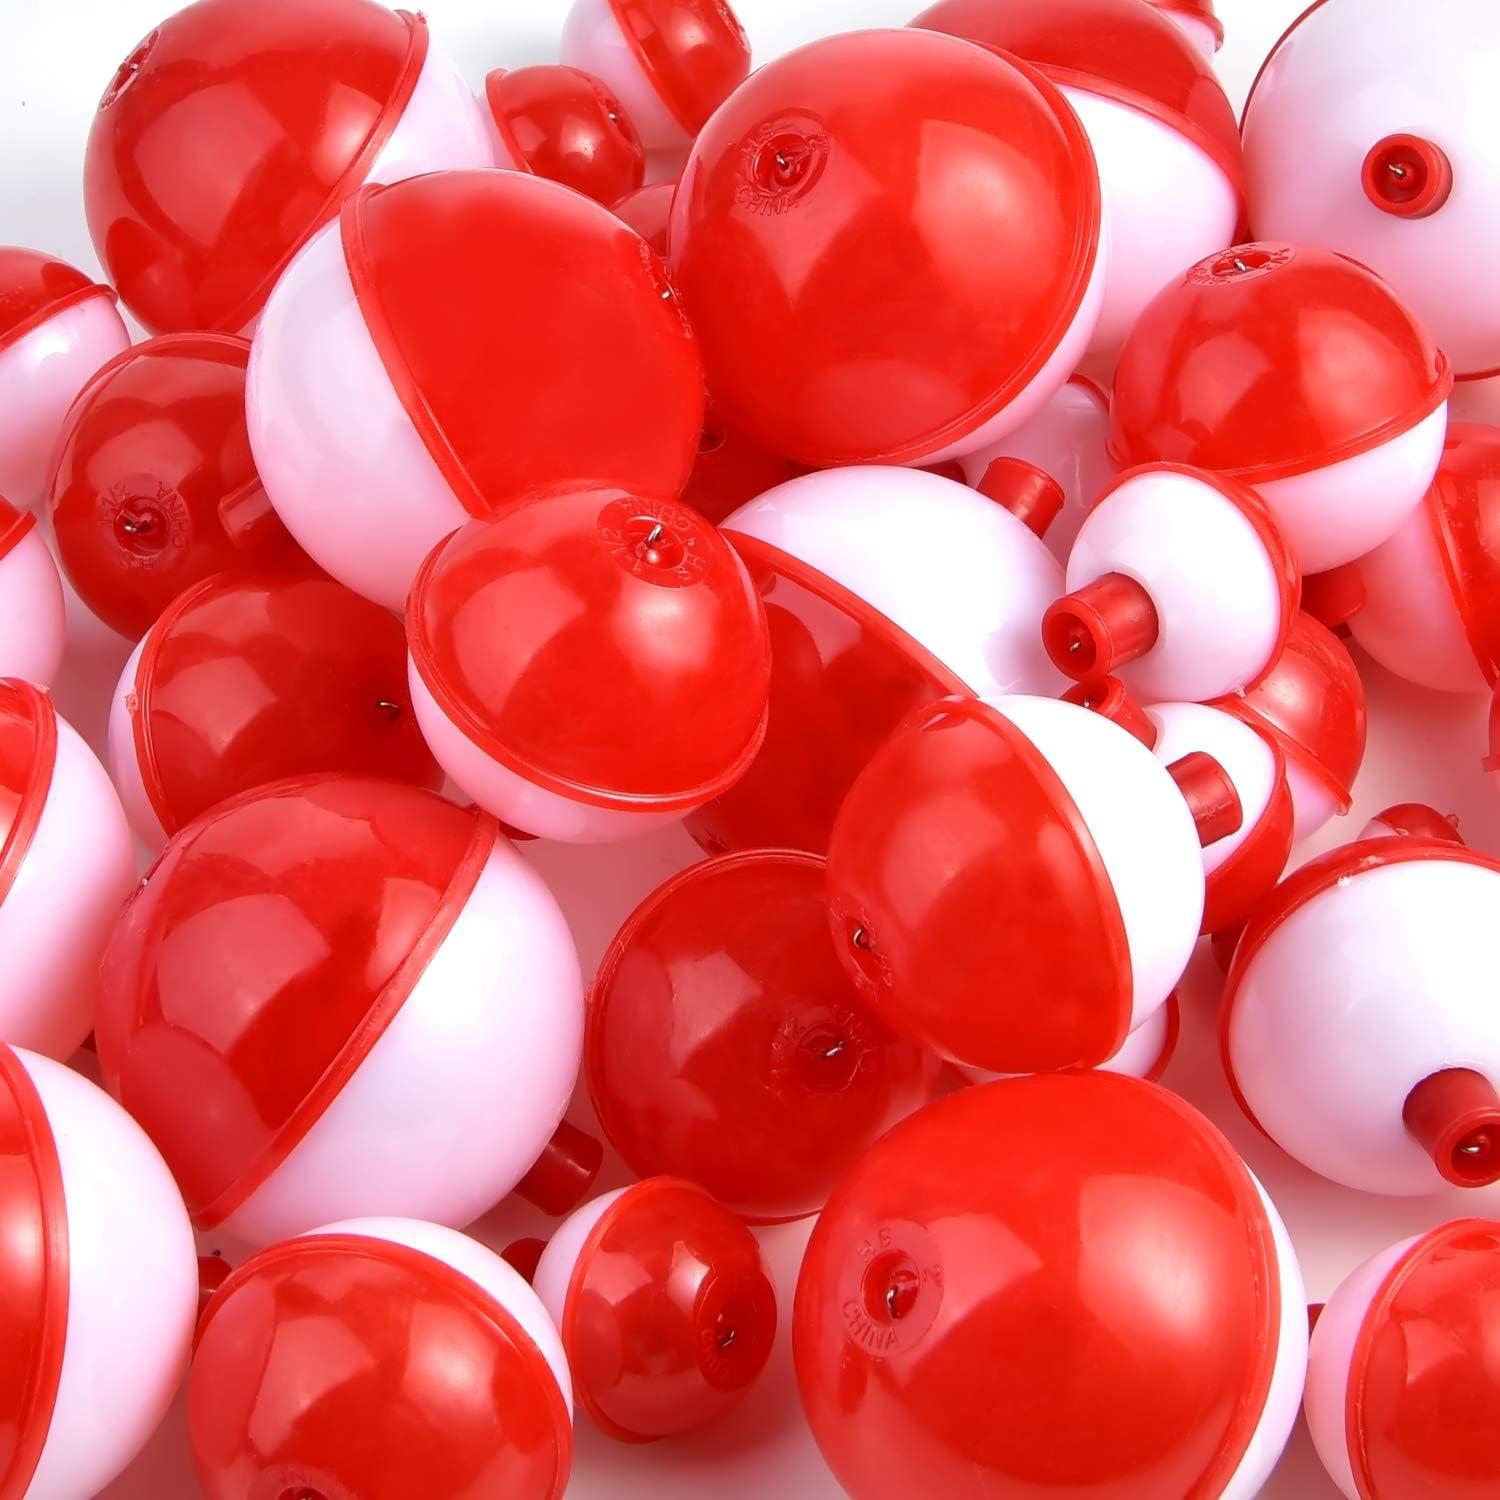 Coopay Fishing Bobbers 30Pcs-50Pcs/Lot Hard ABS Fishing Floats Set Snap on Float  Red/White Bobbers Push Button Round Buoy Floats Fishing Tackle Accessories  0.5+1+1.25+1.5+250pcs